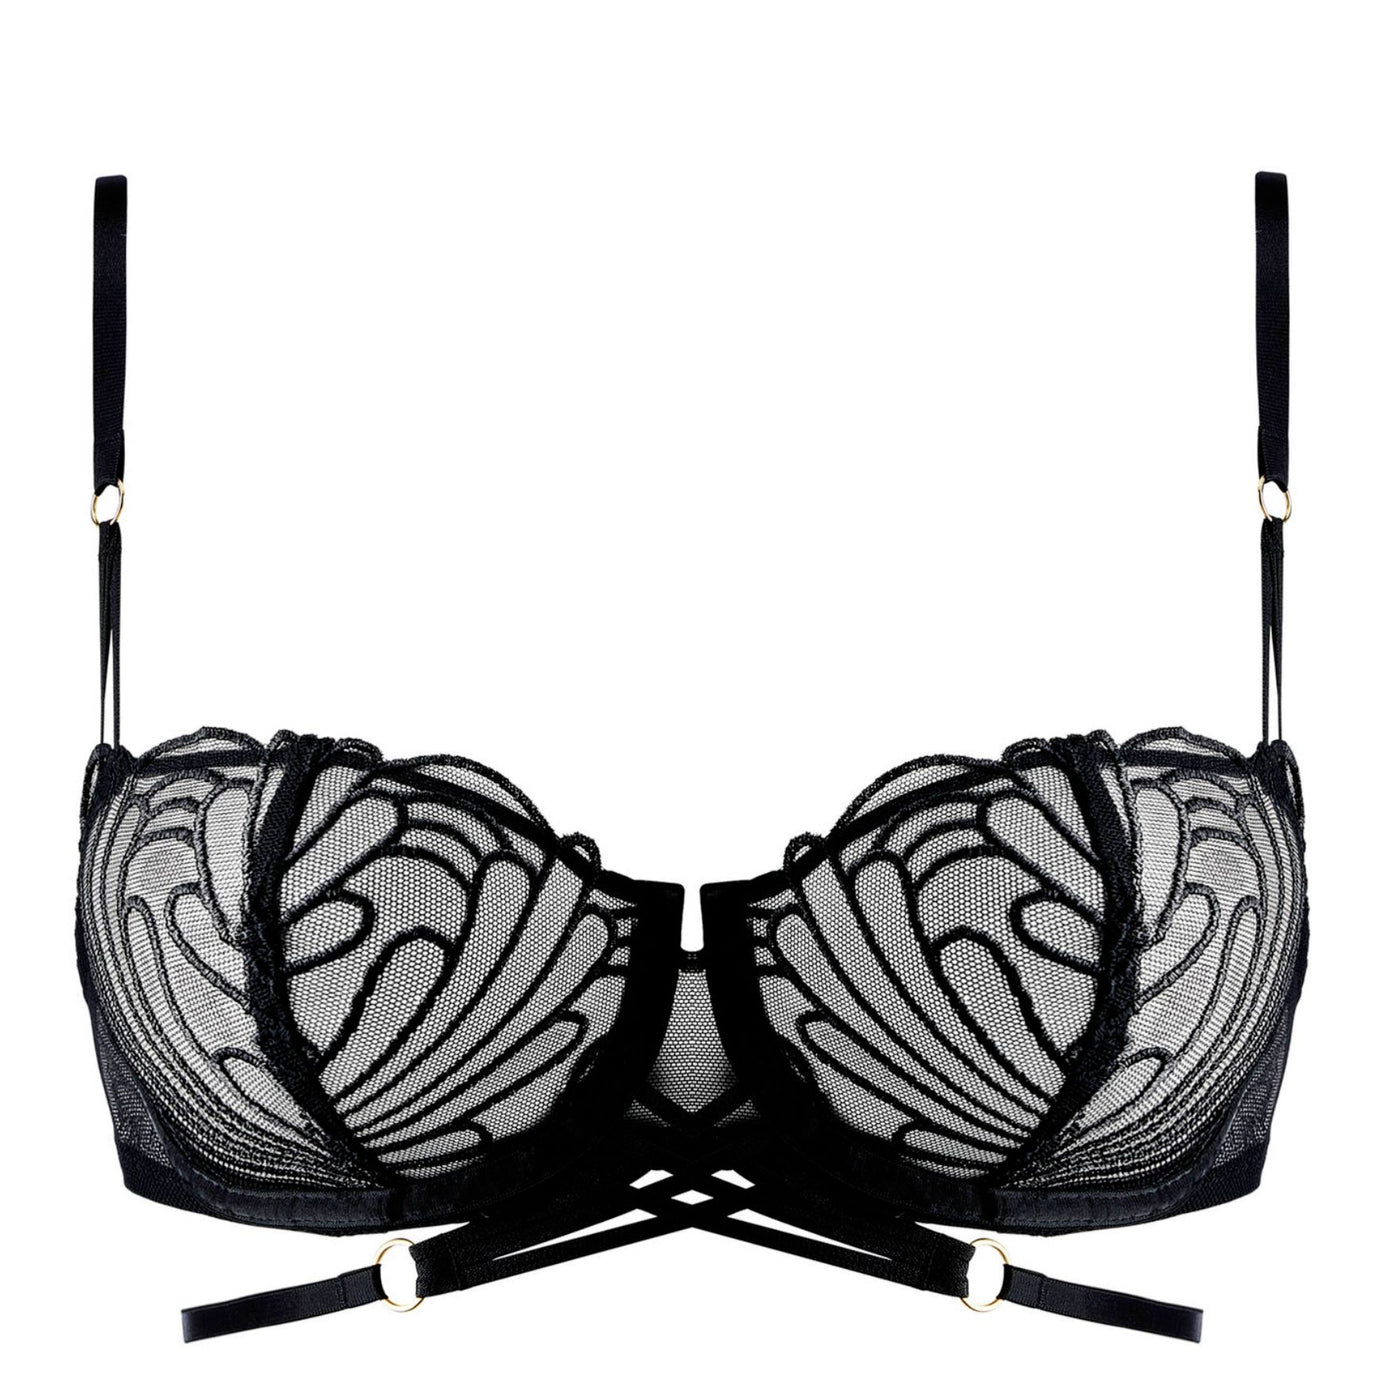 Aubade L'Indomptable Half Cup Bra 1IF14 in After Dark-Bras-Aubade-After Dark-32-B-Anna Bella Fine Lingerie, Reveal Your Most Gorgeous Self!